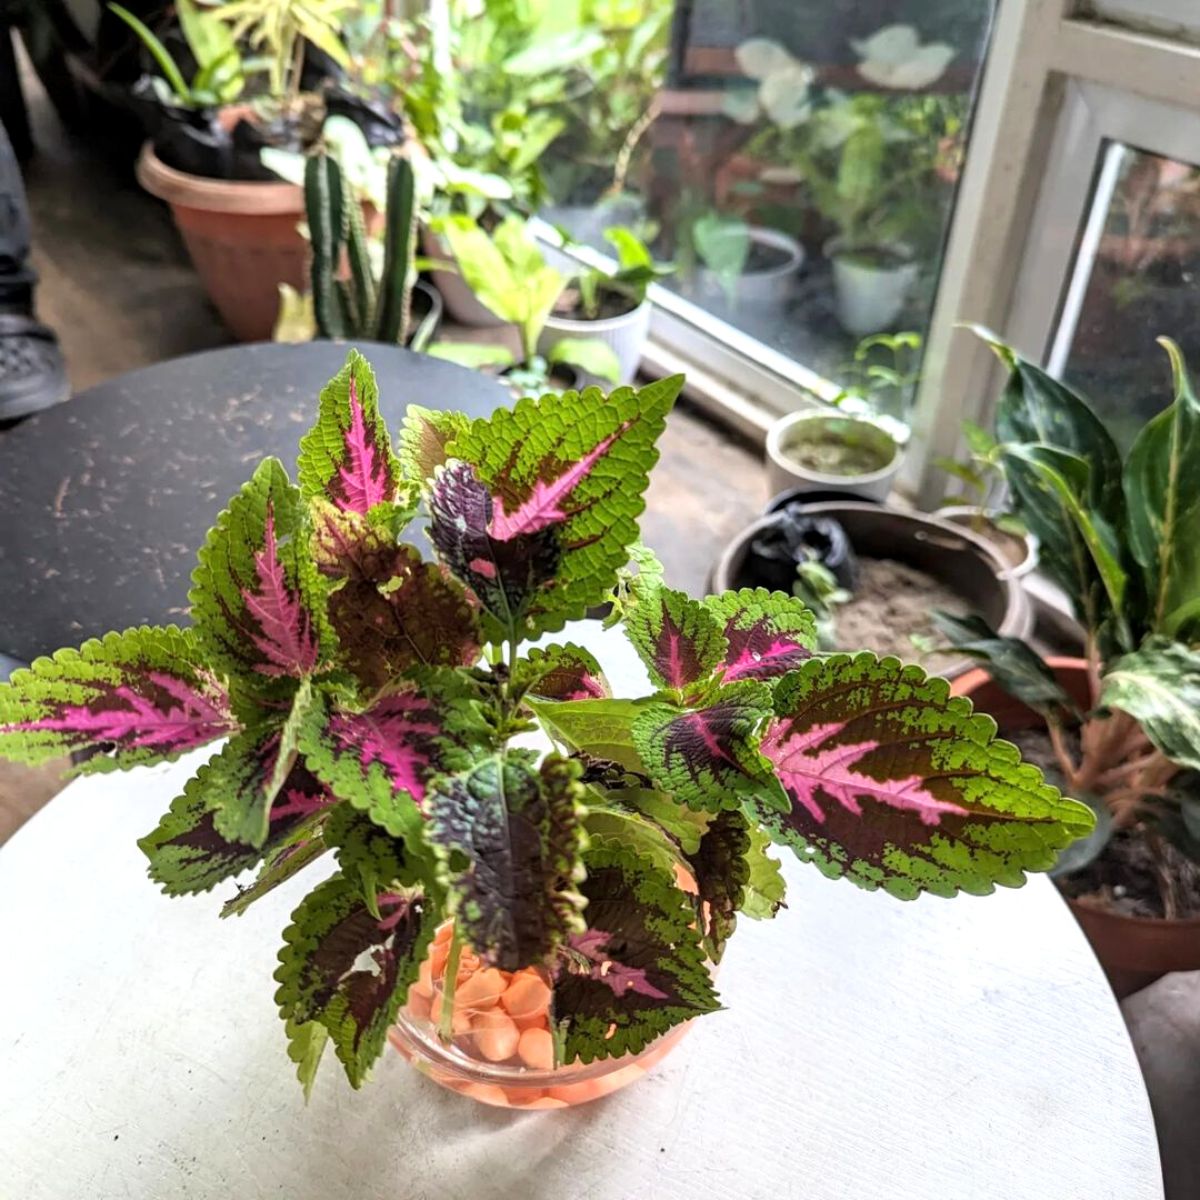 Coleus plants roots submerged in water